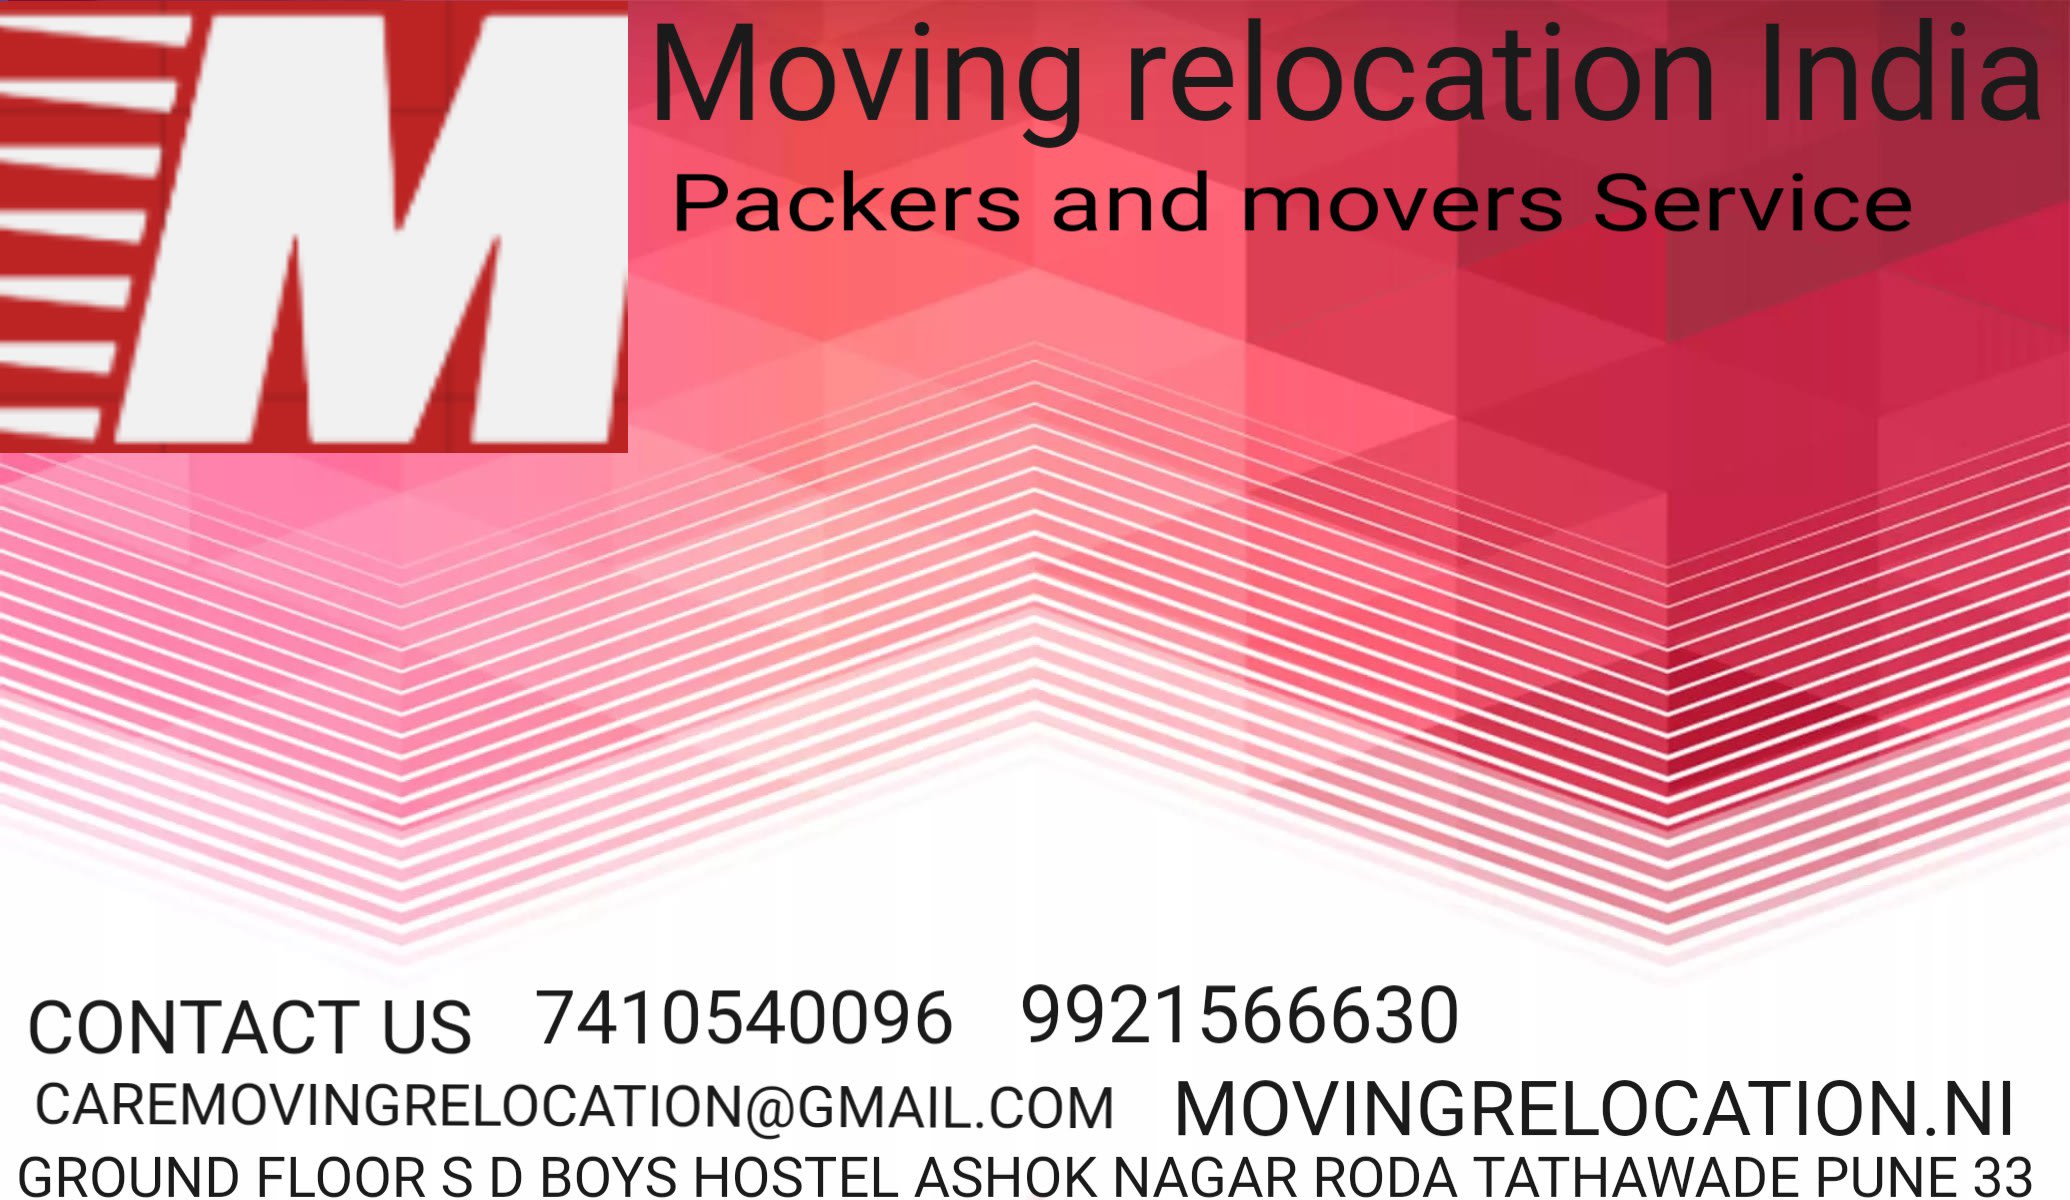 Moving relocation